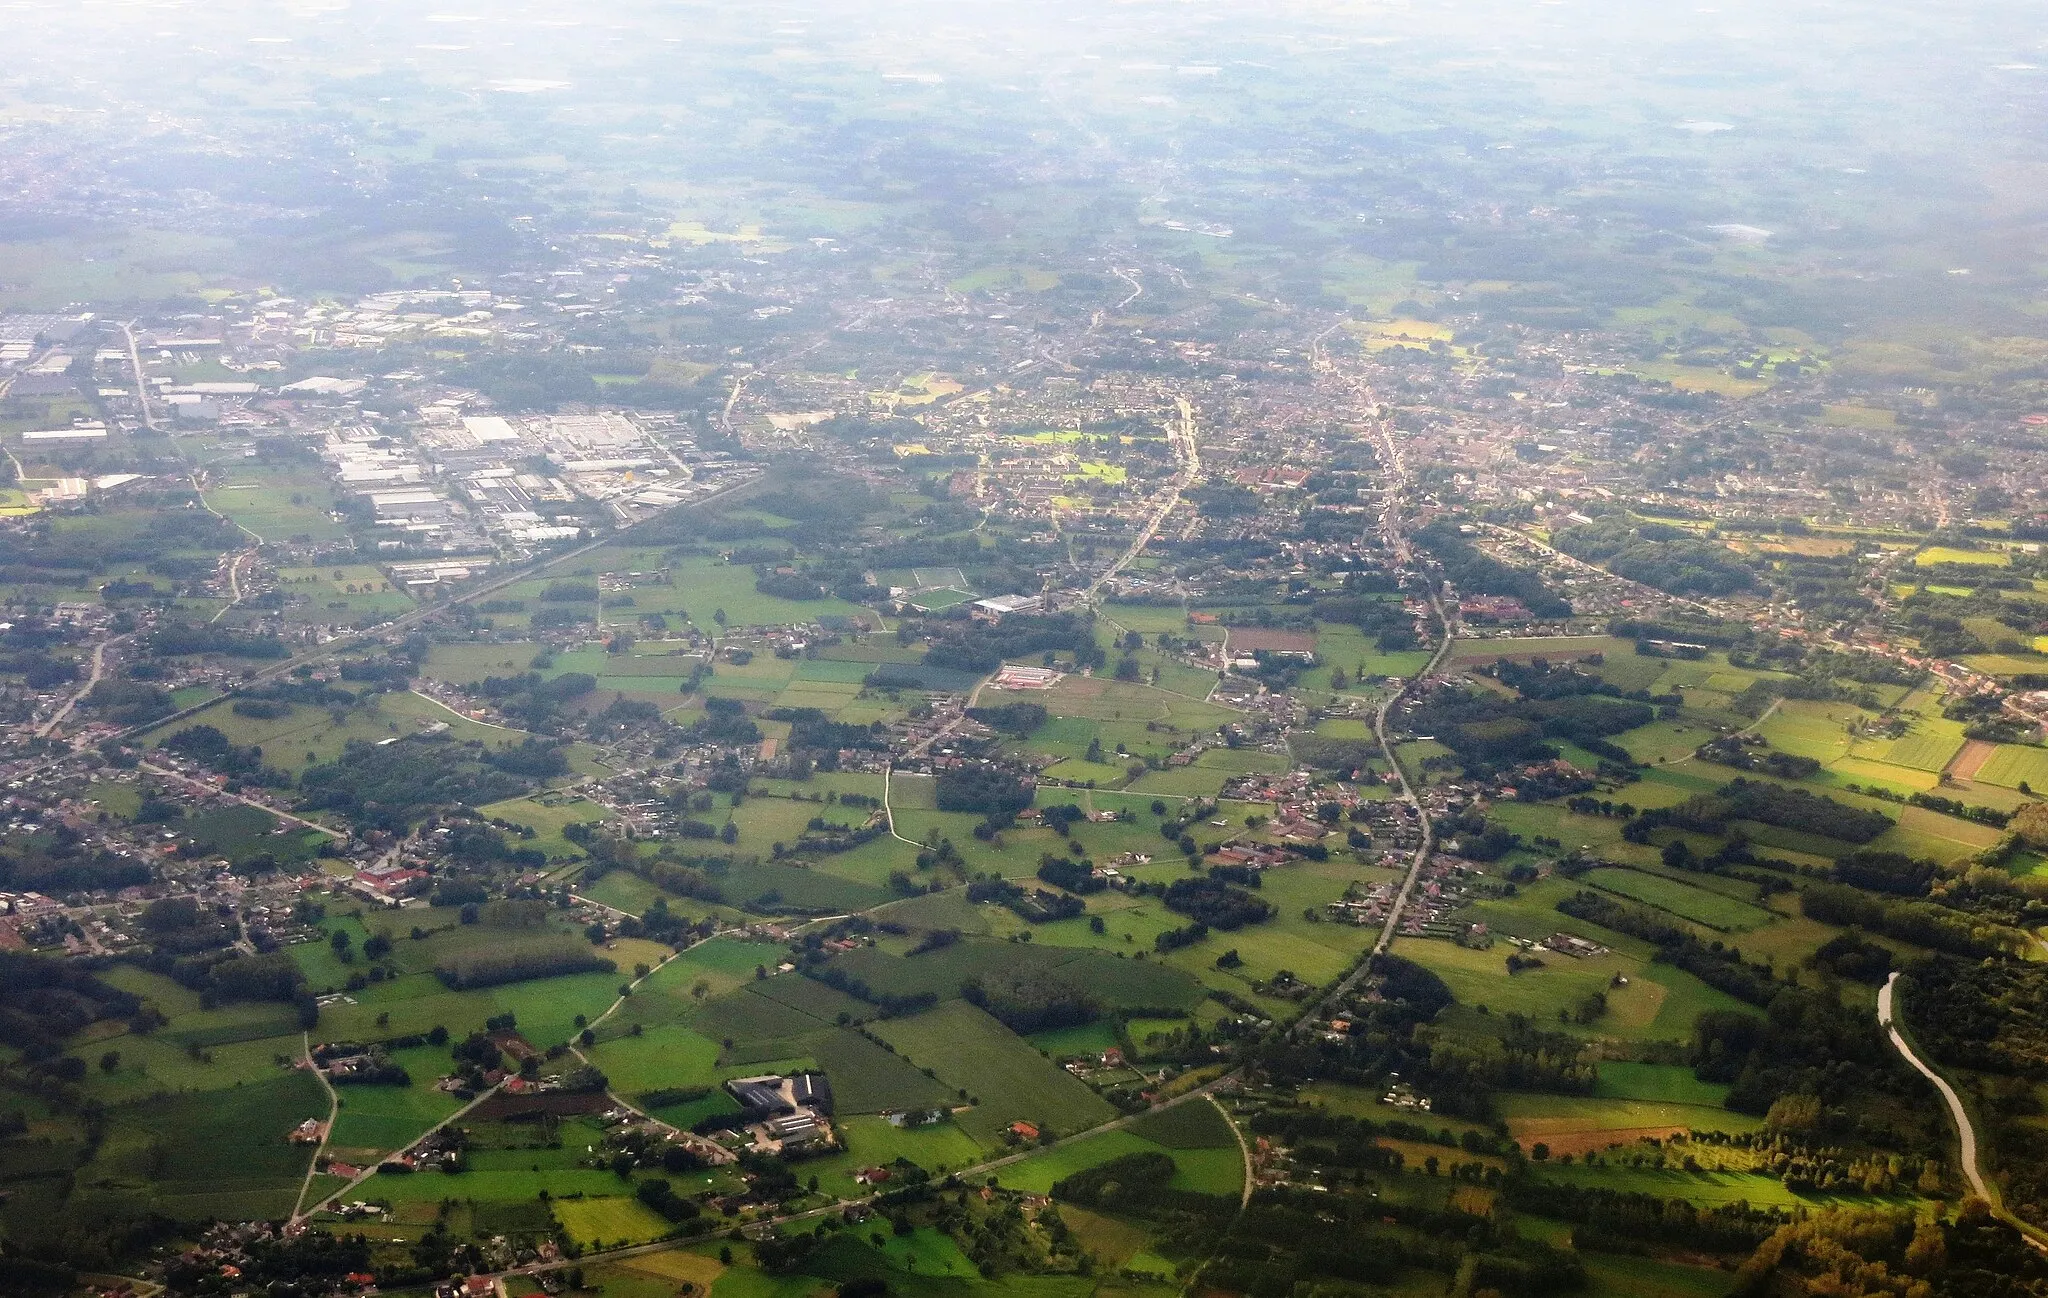 Photo showing: Aerial view from the (south)east towards (north)west, over the Hageland-Leuven region of northern Belgium. This municipality lies north of Brussels and west of Leuwen.